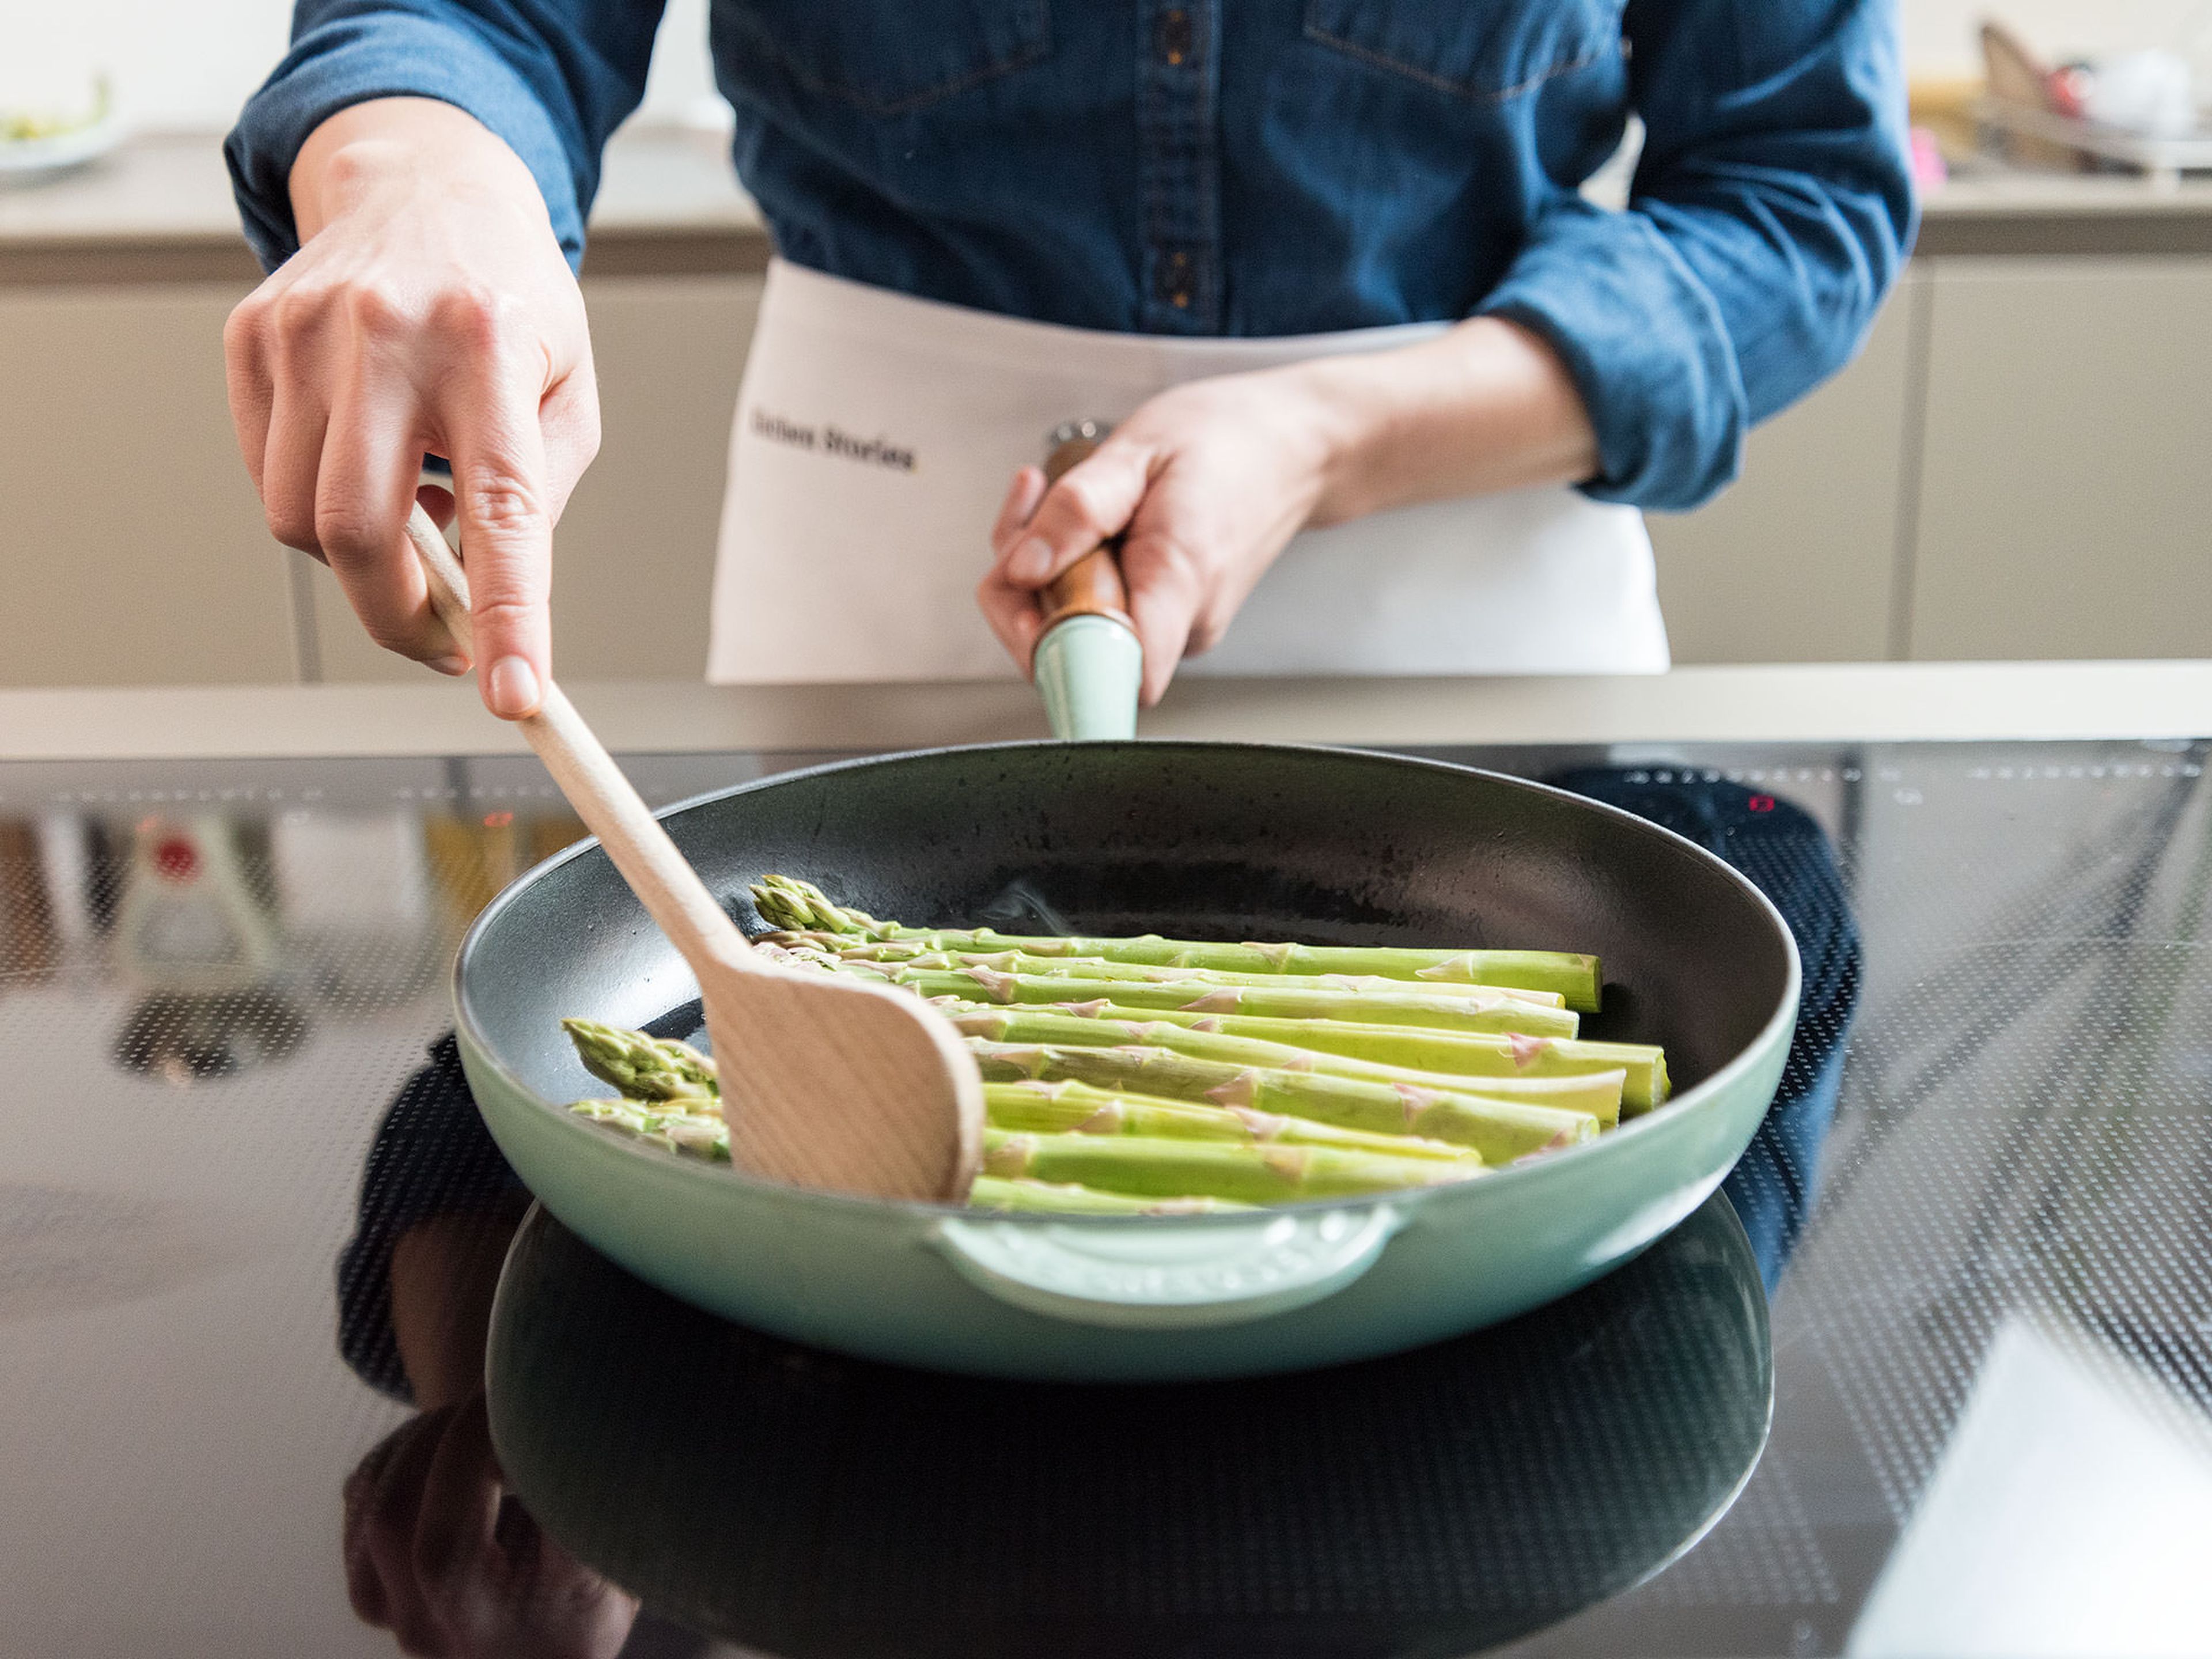 In another frying pan, heat up olive oil, add asparagus and sauté for approx. 5 – 7 min. until soft and starting to turn golden brown. Add lemon juice and season with salt and pepper. Then set aside.